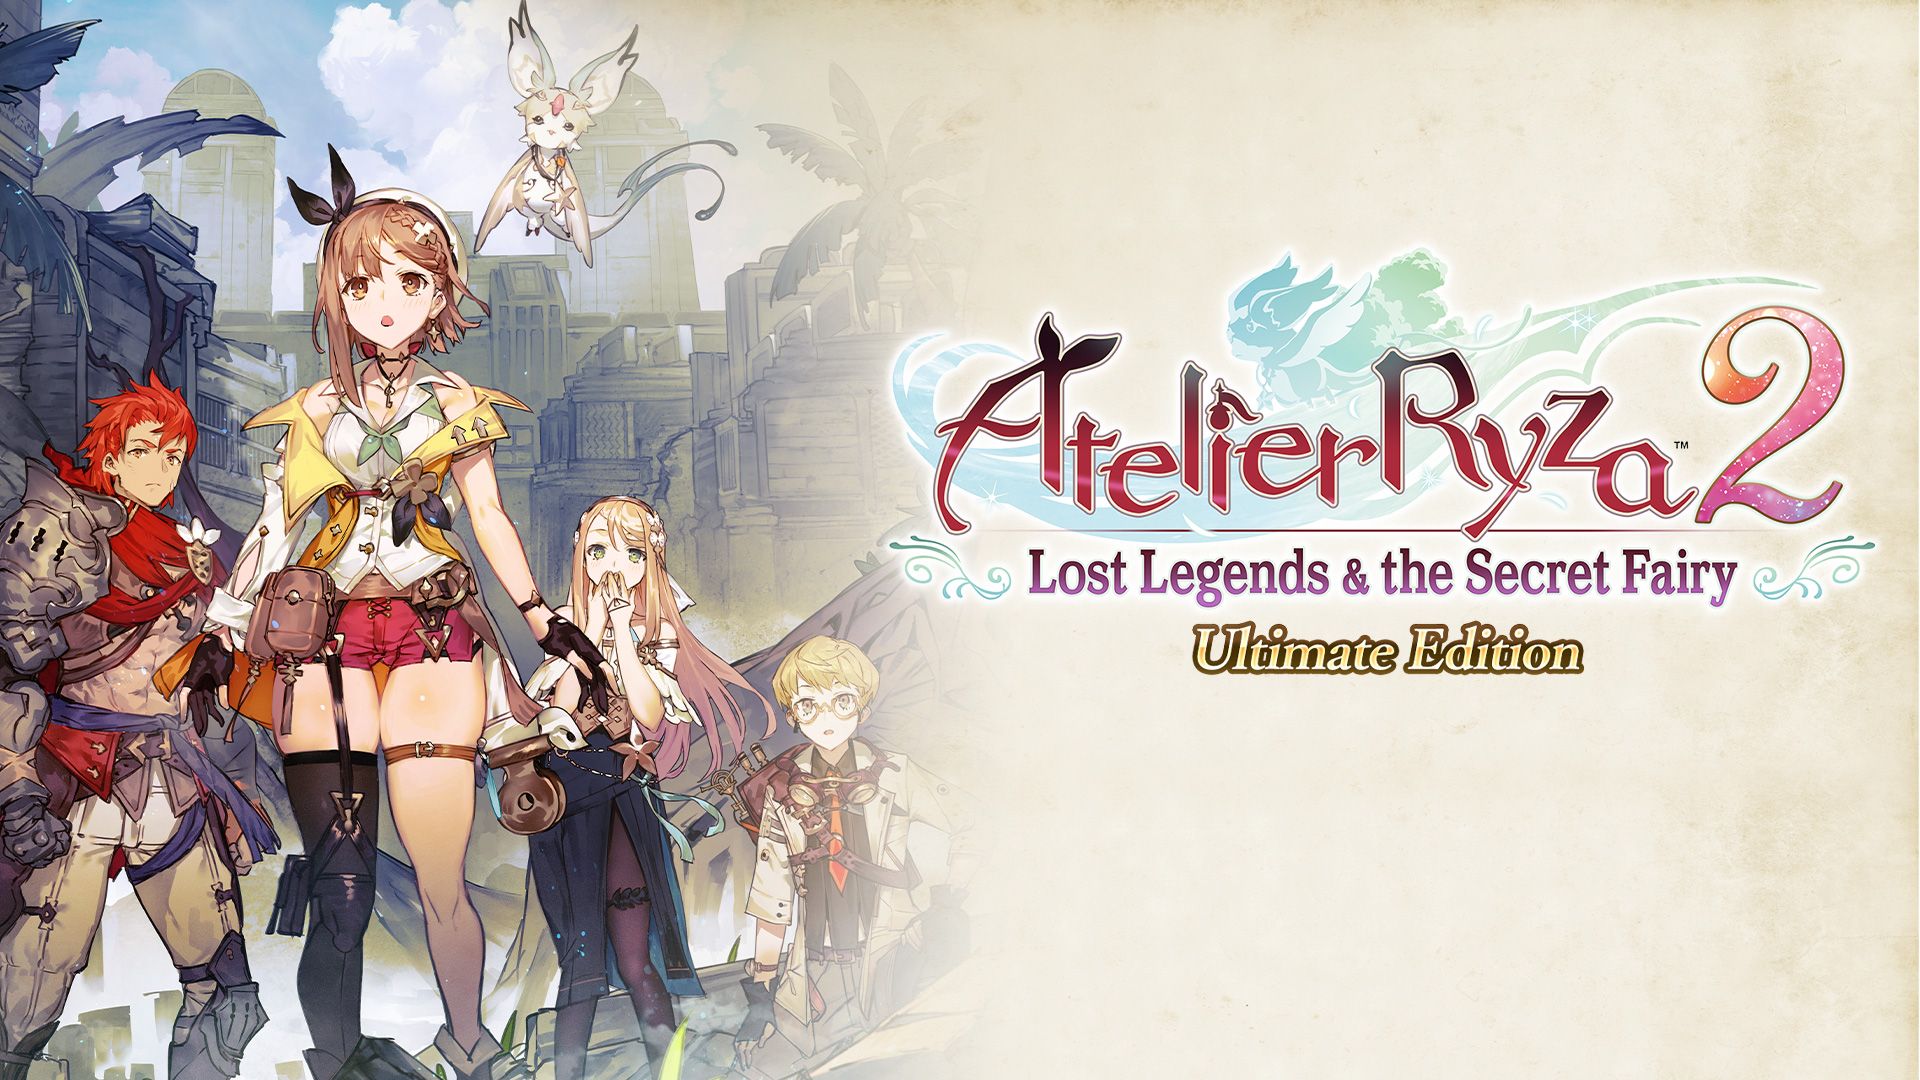 Atelier Ryza 2: Lost Legends & the Secret Fairy for Nintendo Switch Game Details